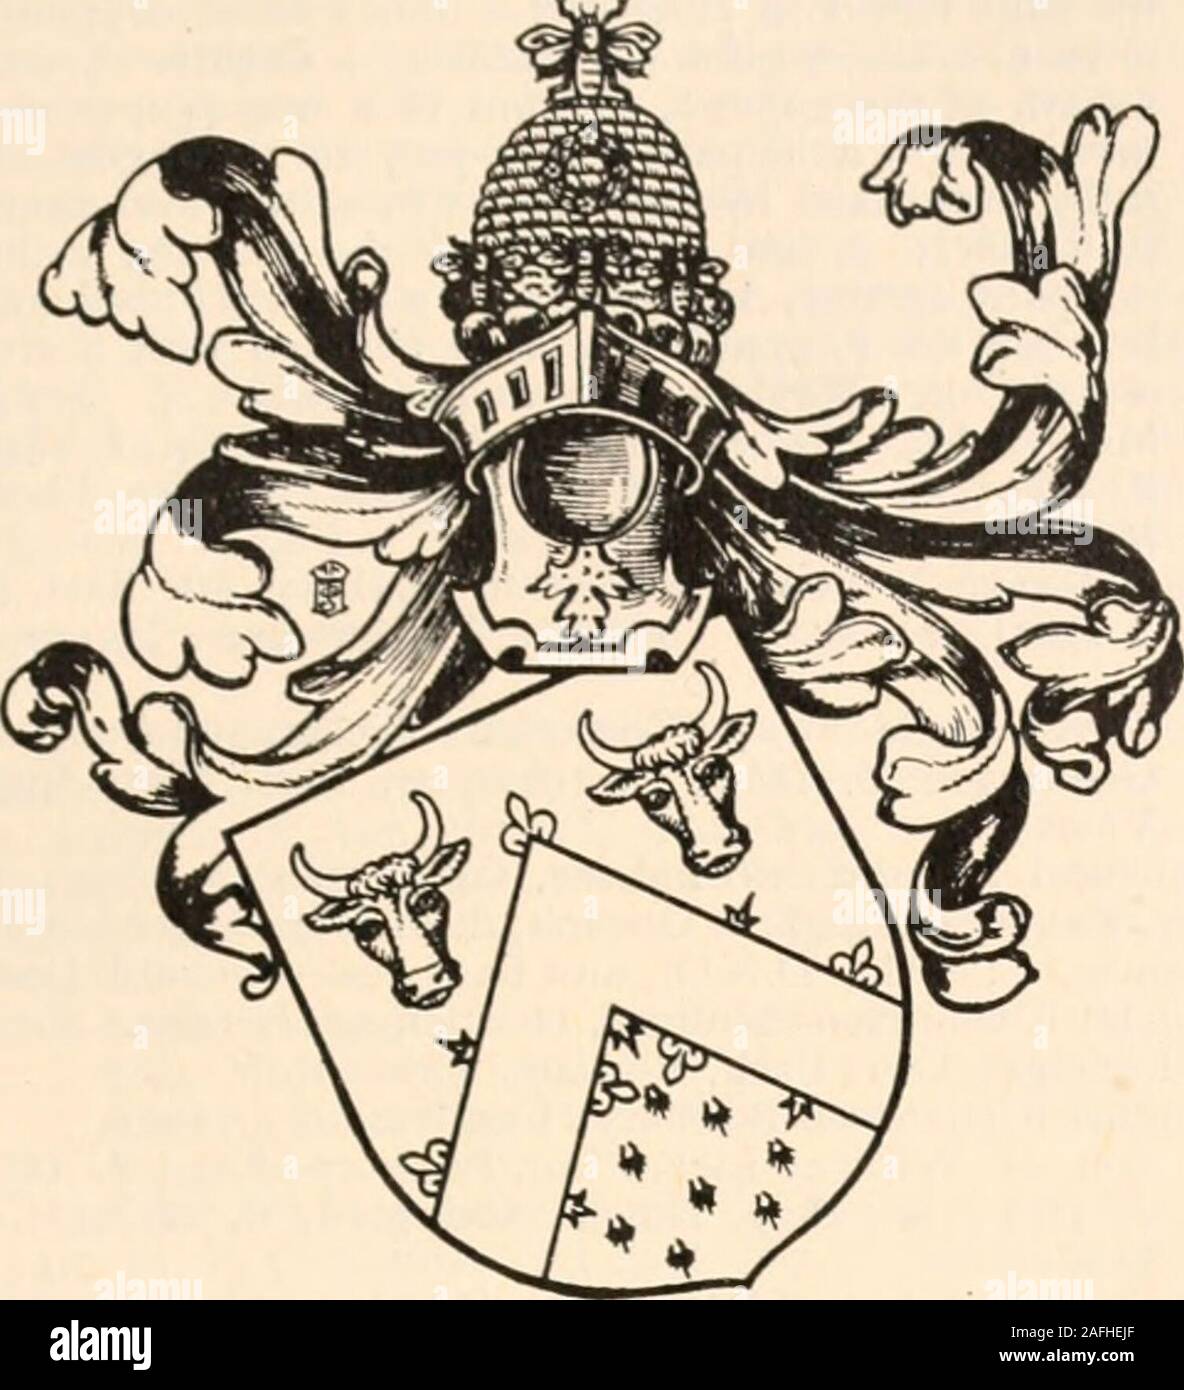 Armorial families : a directory of gentlemen of coat-armour. d. 191of  Thomas Henry Whipham,CJhiswick i—Edward Clifford Bullock, Gentleman, d.  1866; m ist,Mabel, d. of H. F ster; 2nd his cousin Agnes